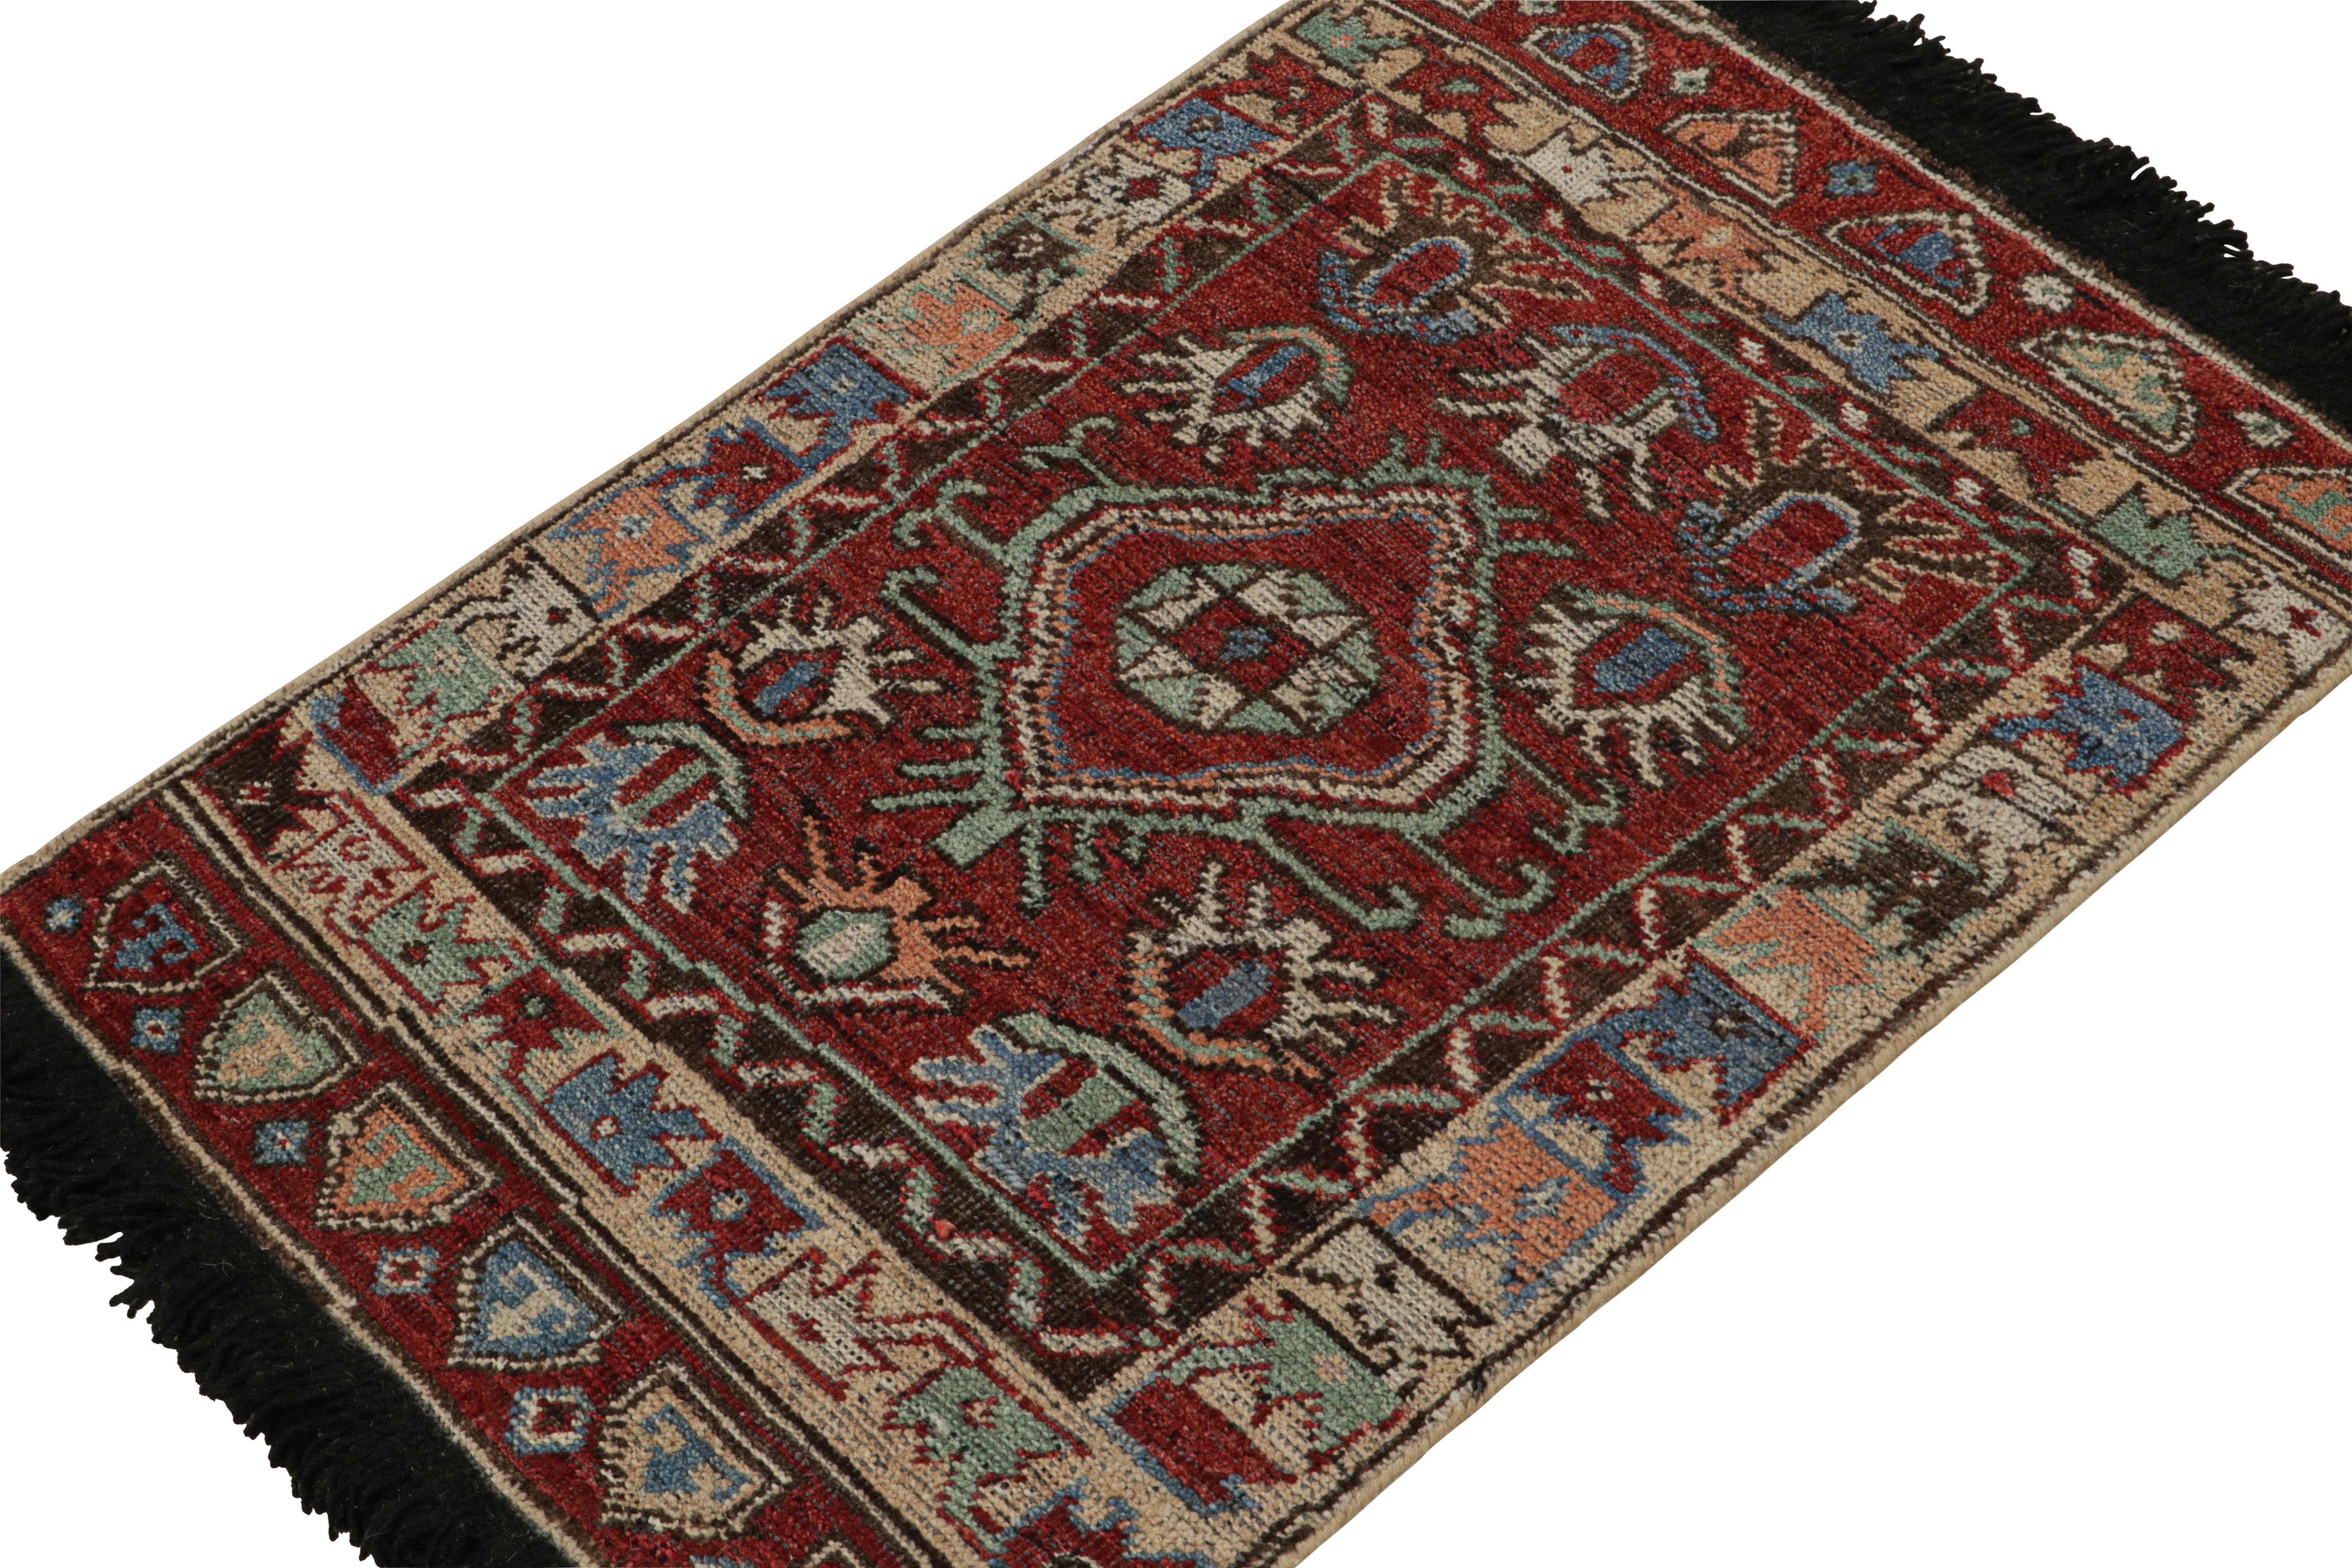 Indian Rug & Kilim’s Antique Tribal Style Rug in Red, Blue, Green & Black Patterns For Sale